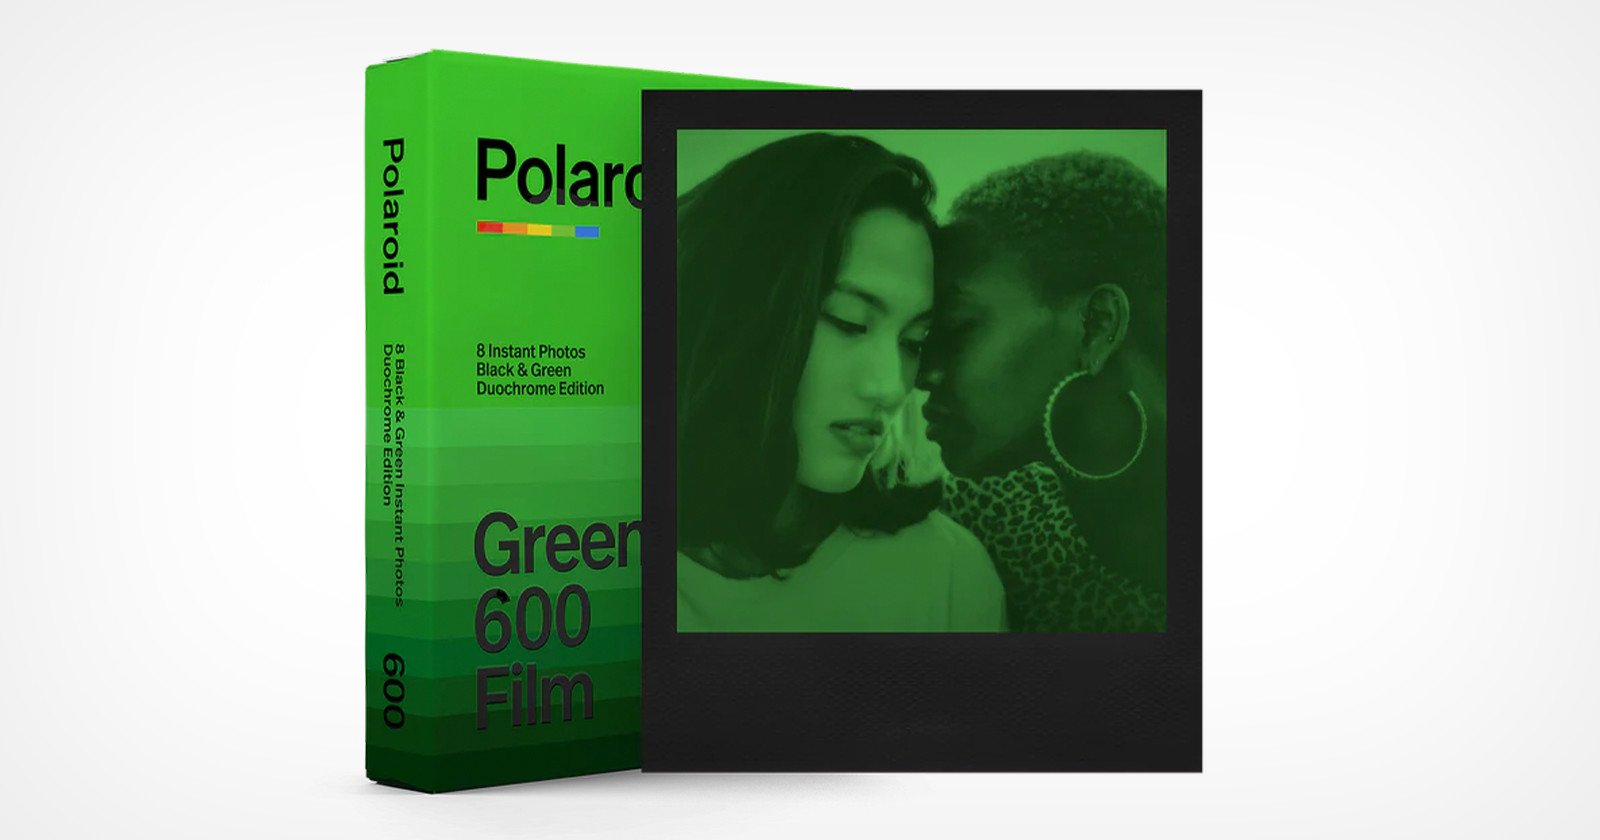 Polaroid Launches Limited Edition Green Duochrome Film